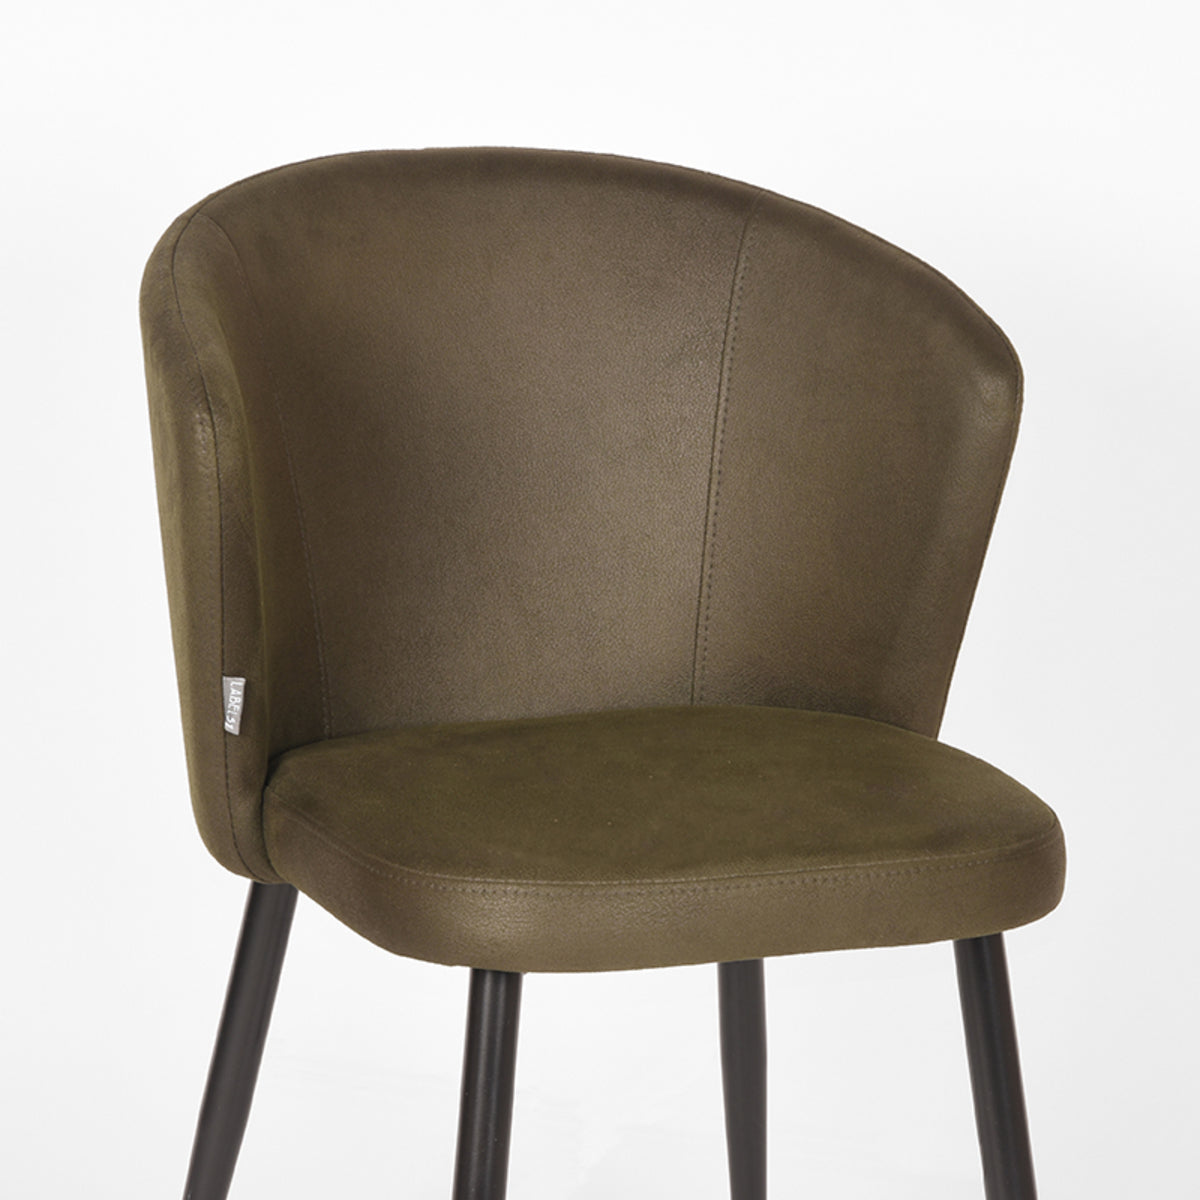 LABEL51 Dining room chair Wave - Army green - Microfiber | 2 pieces